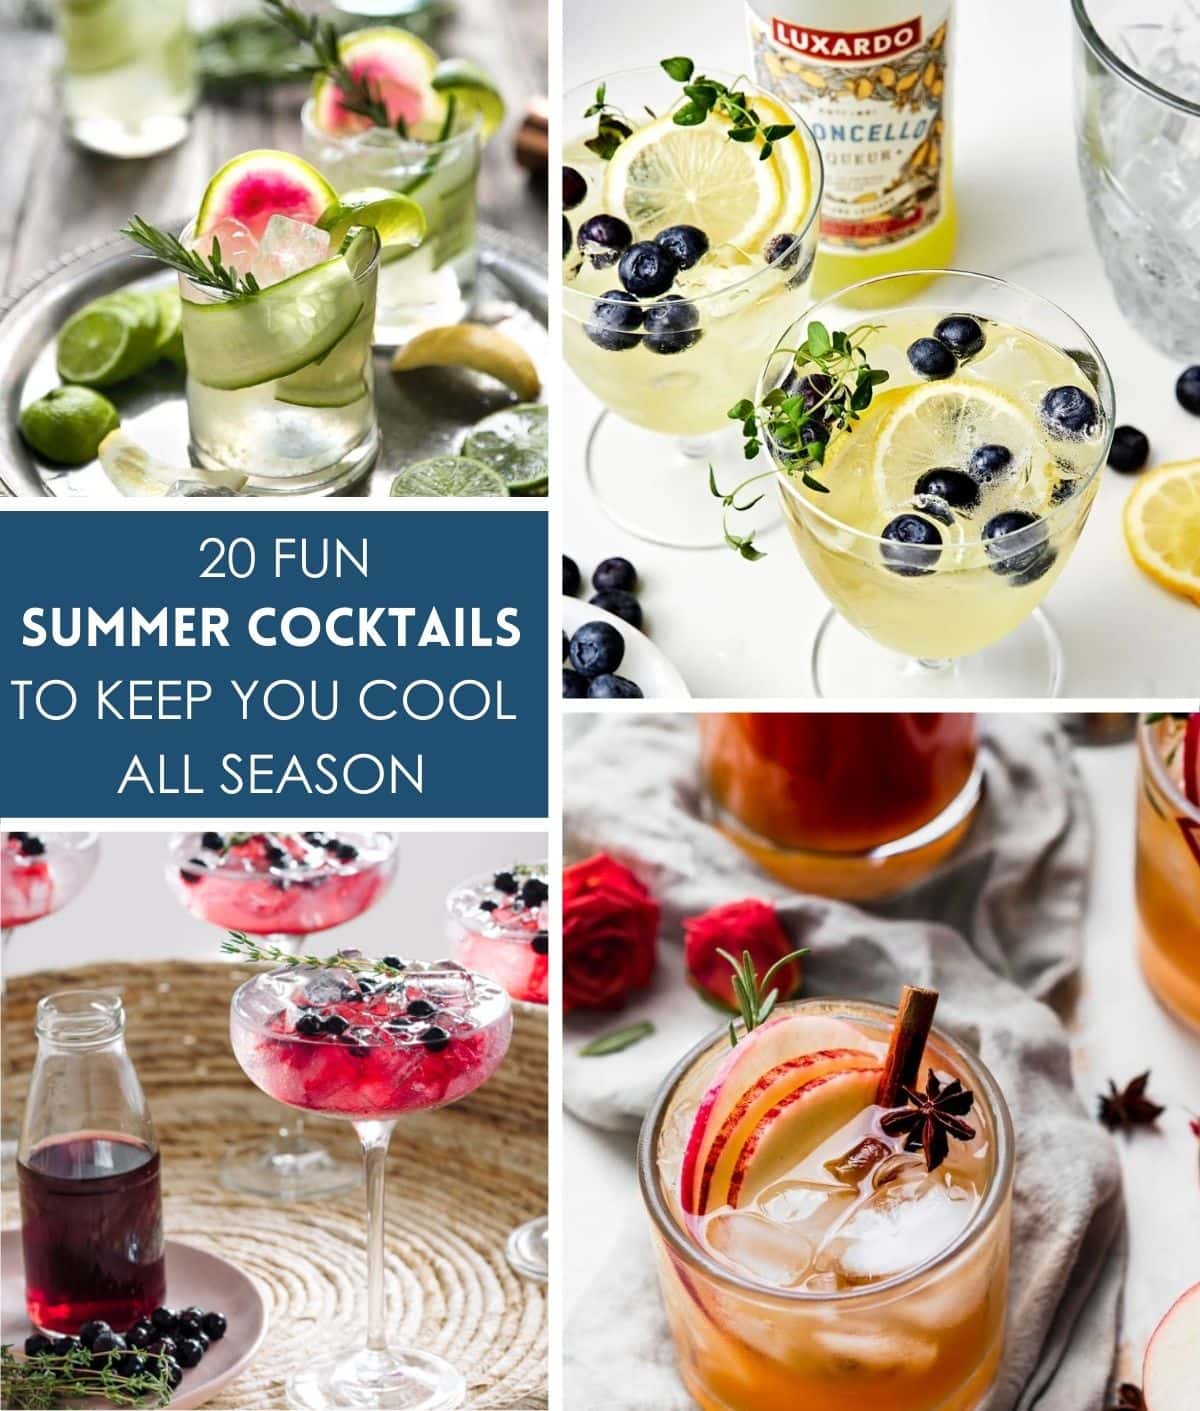 20 Fun Summer Cocktails to Keep You Cool All Season